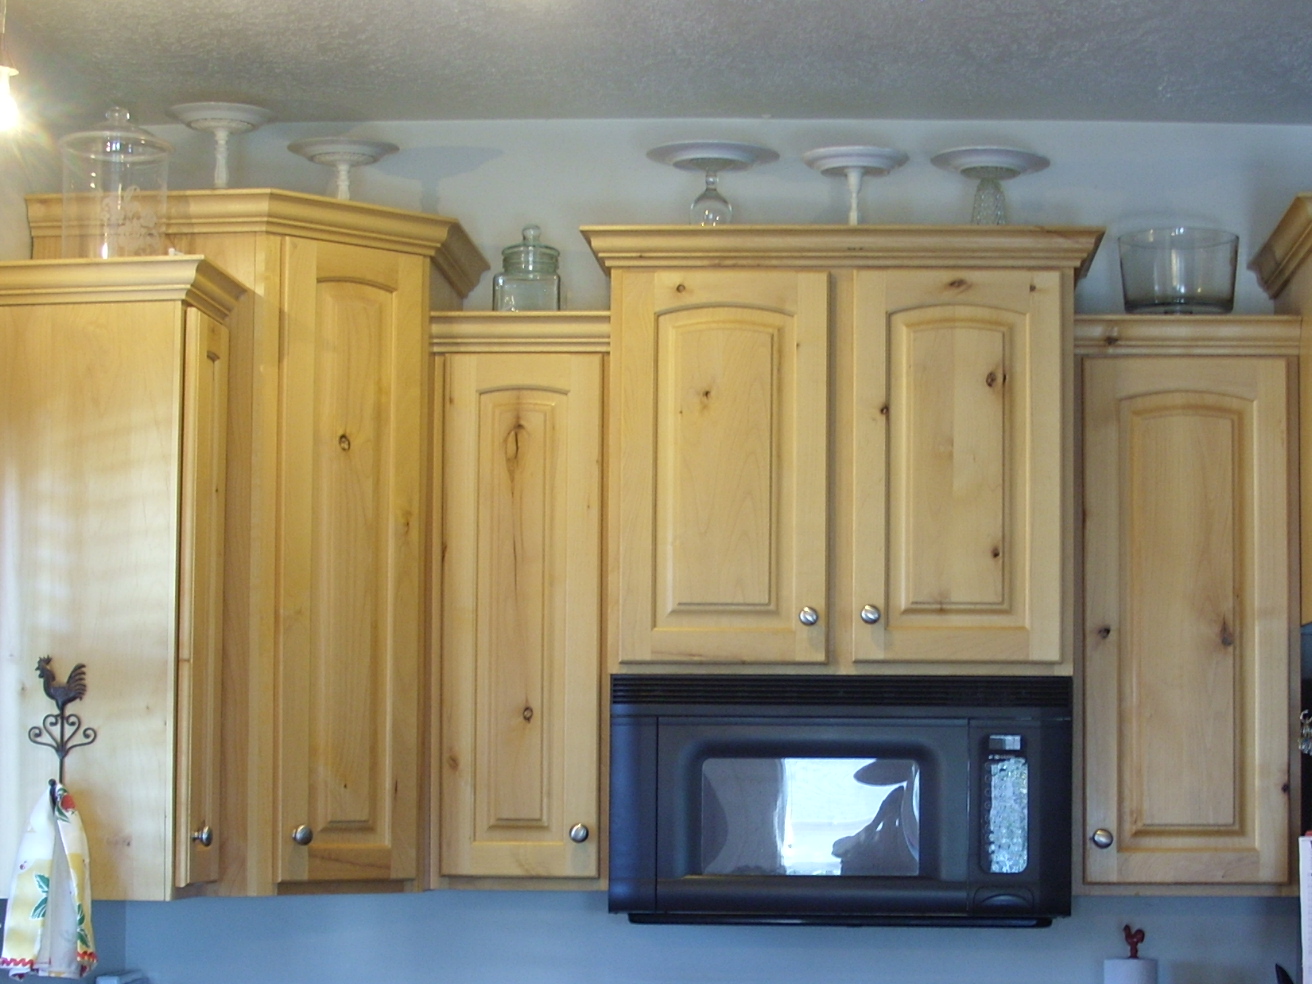 Decorating the Top of the Kitchen Cabinets - Organize and Decorate